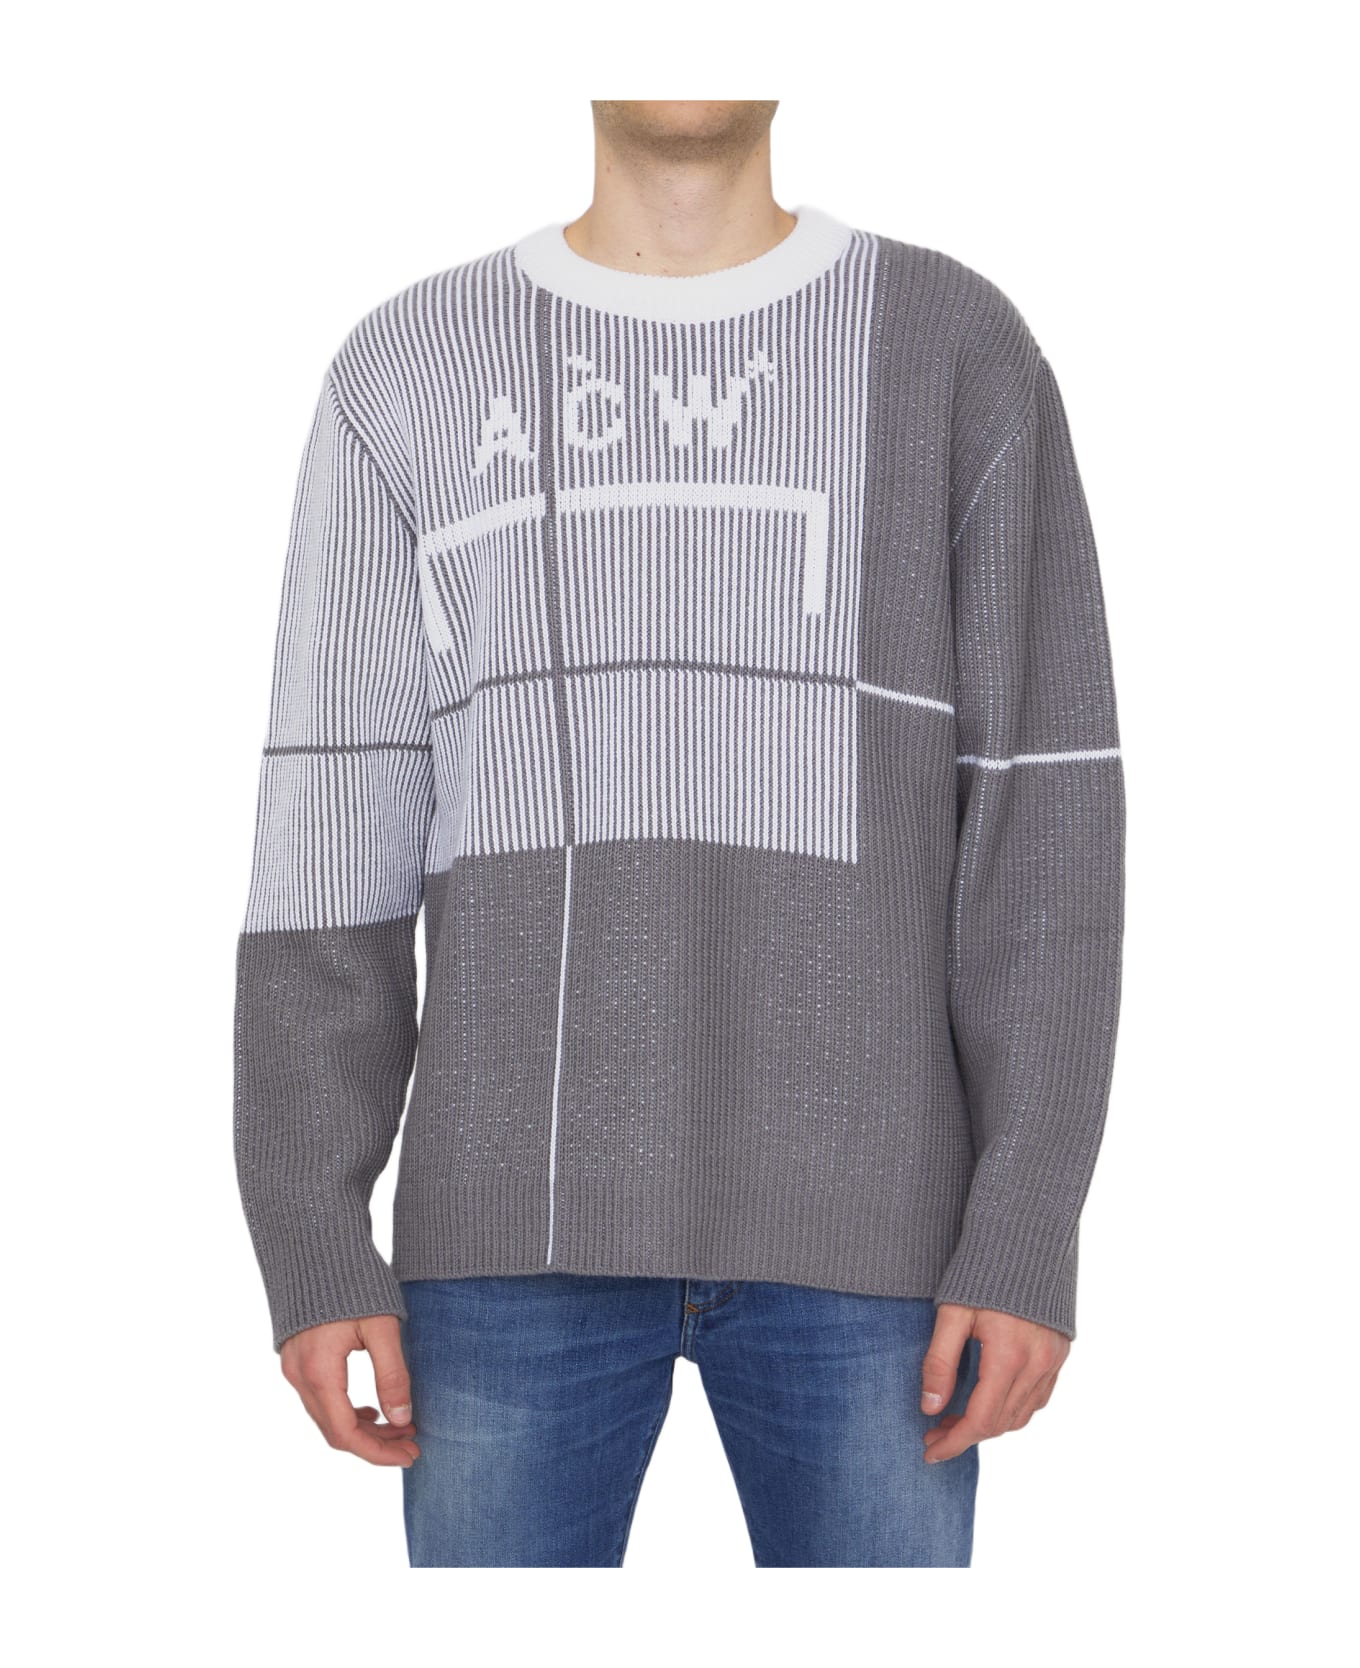 A-COLD-WALL Grid Sweater - GREY